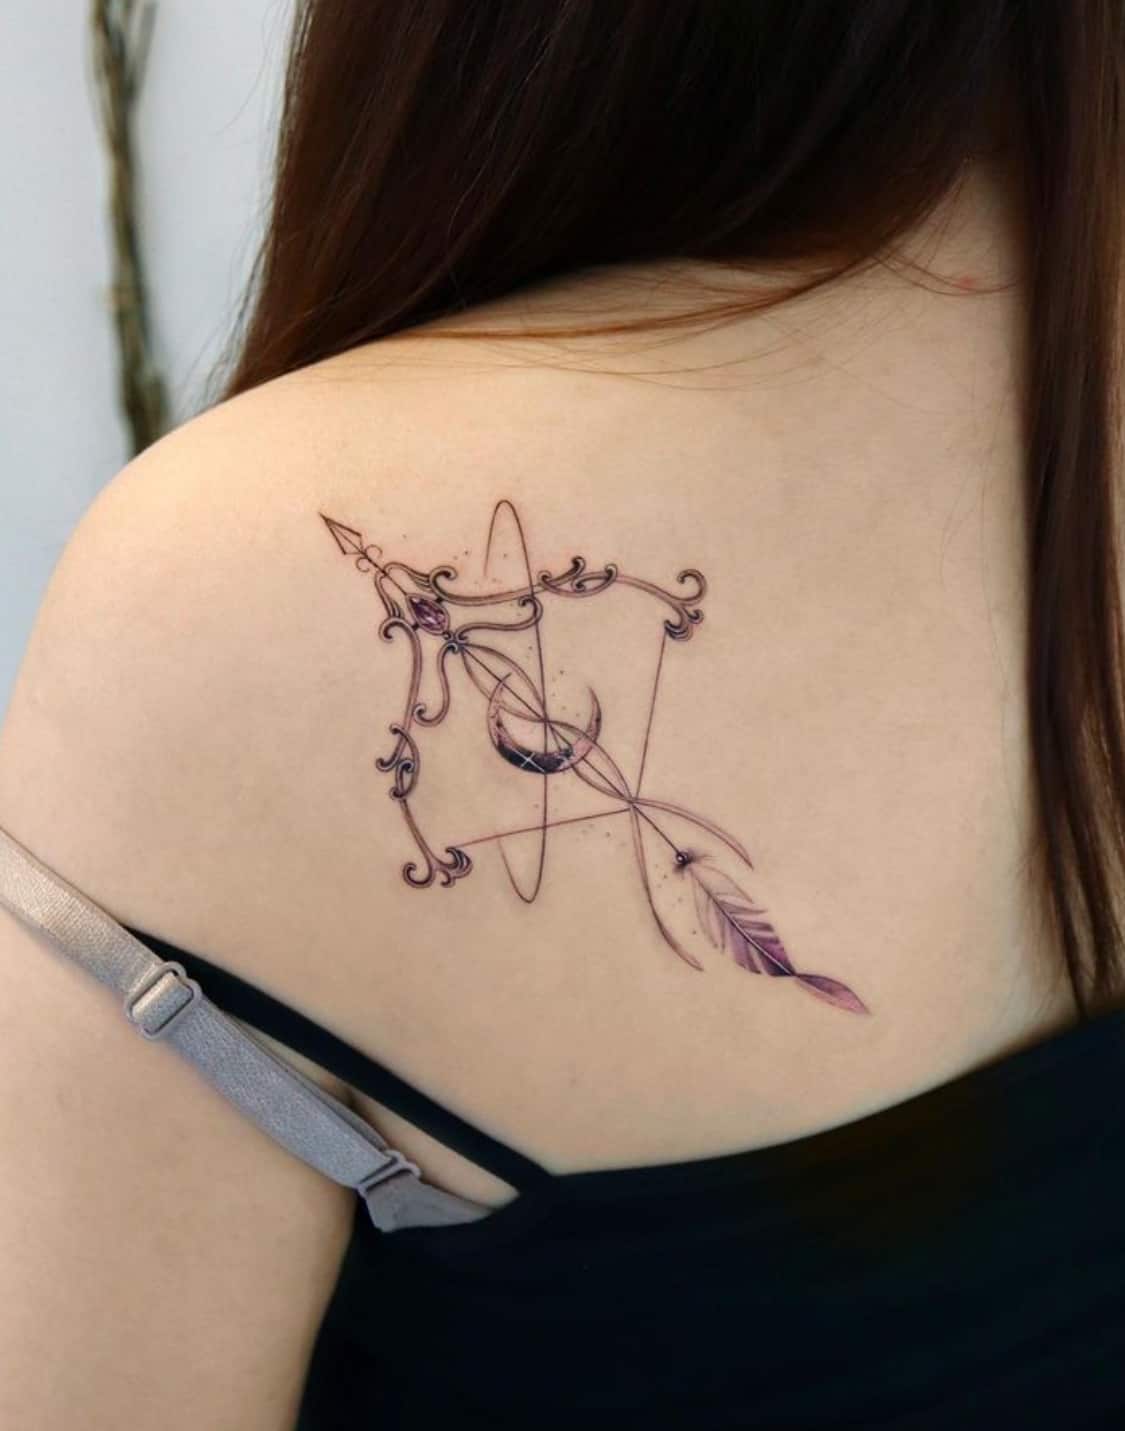 thoughts on this one? : r/shittytattoos